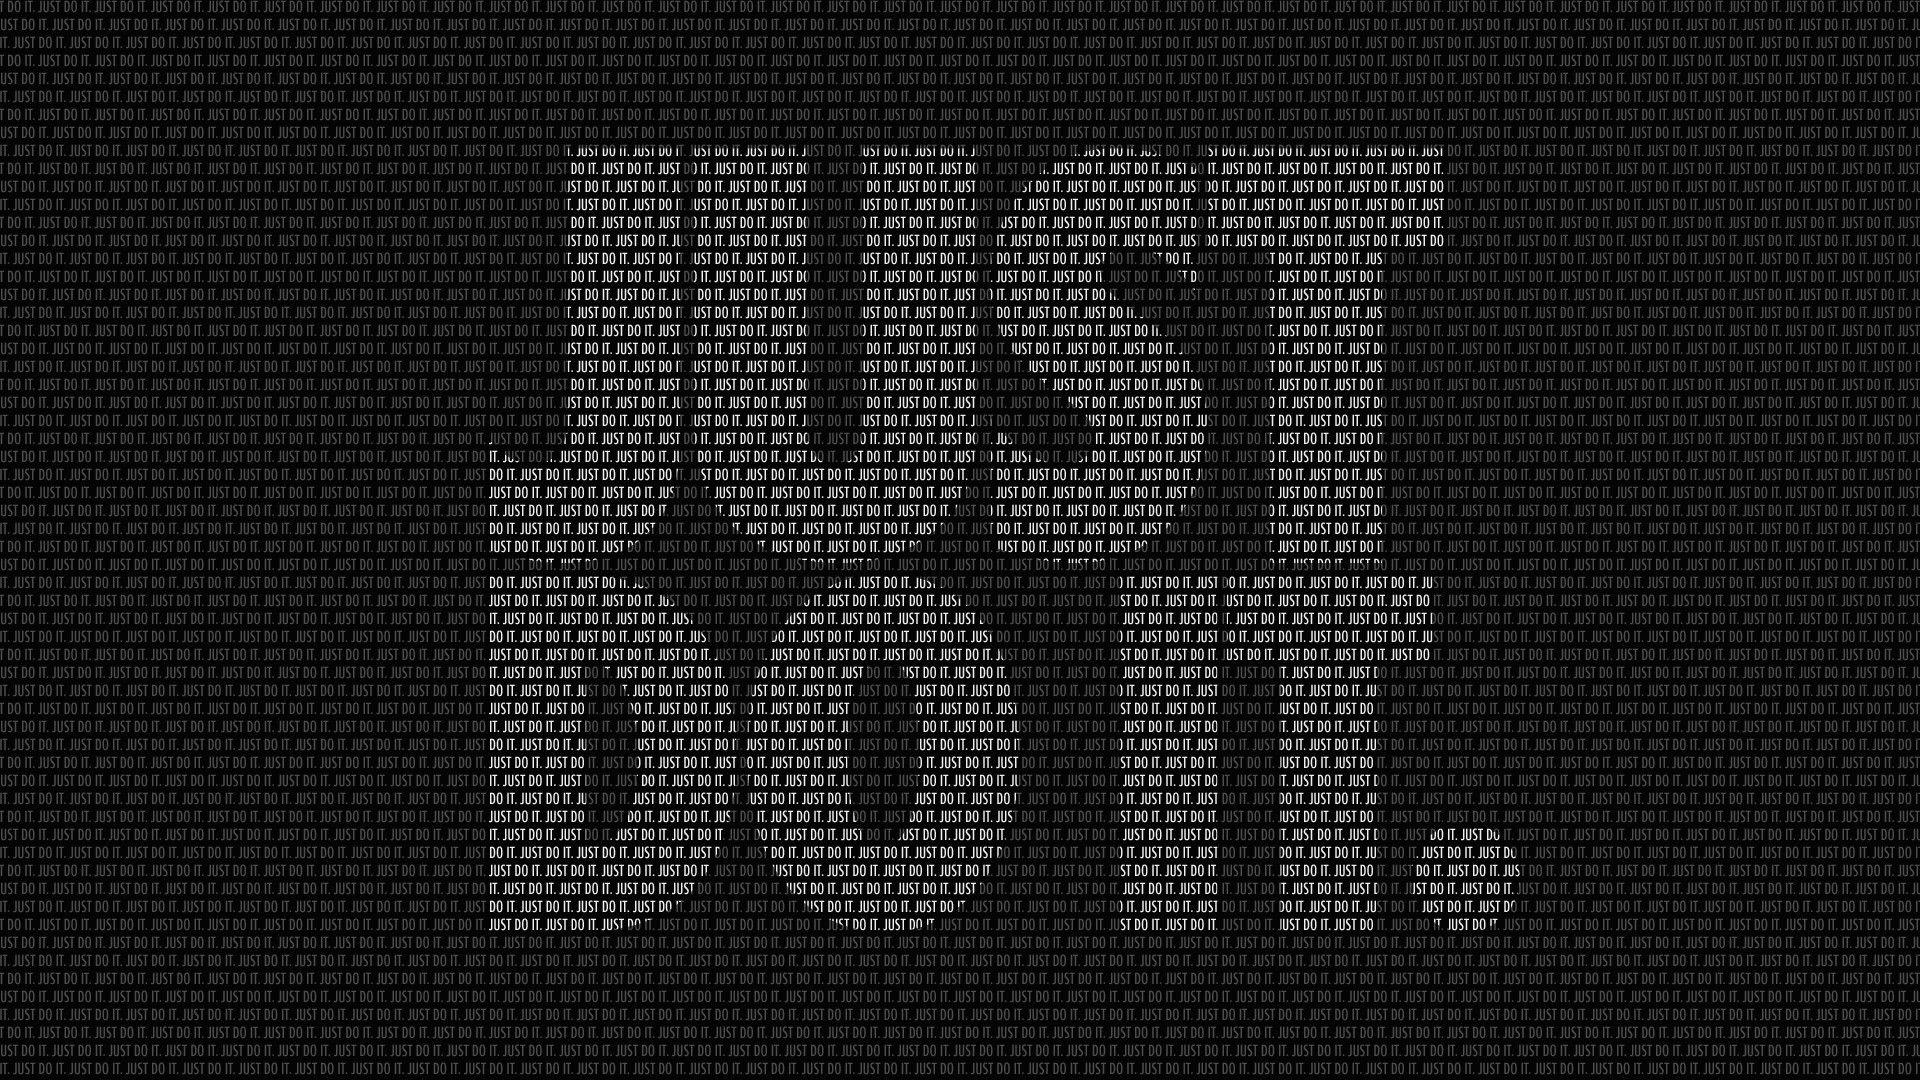 nike just do it backgrounds